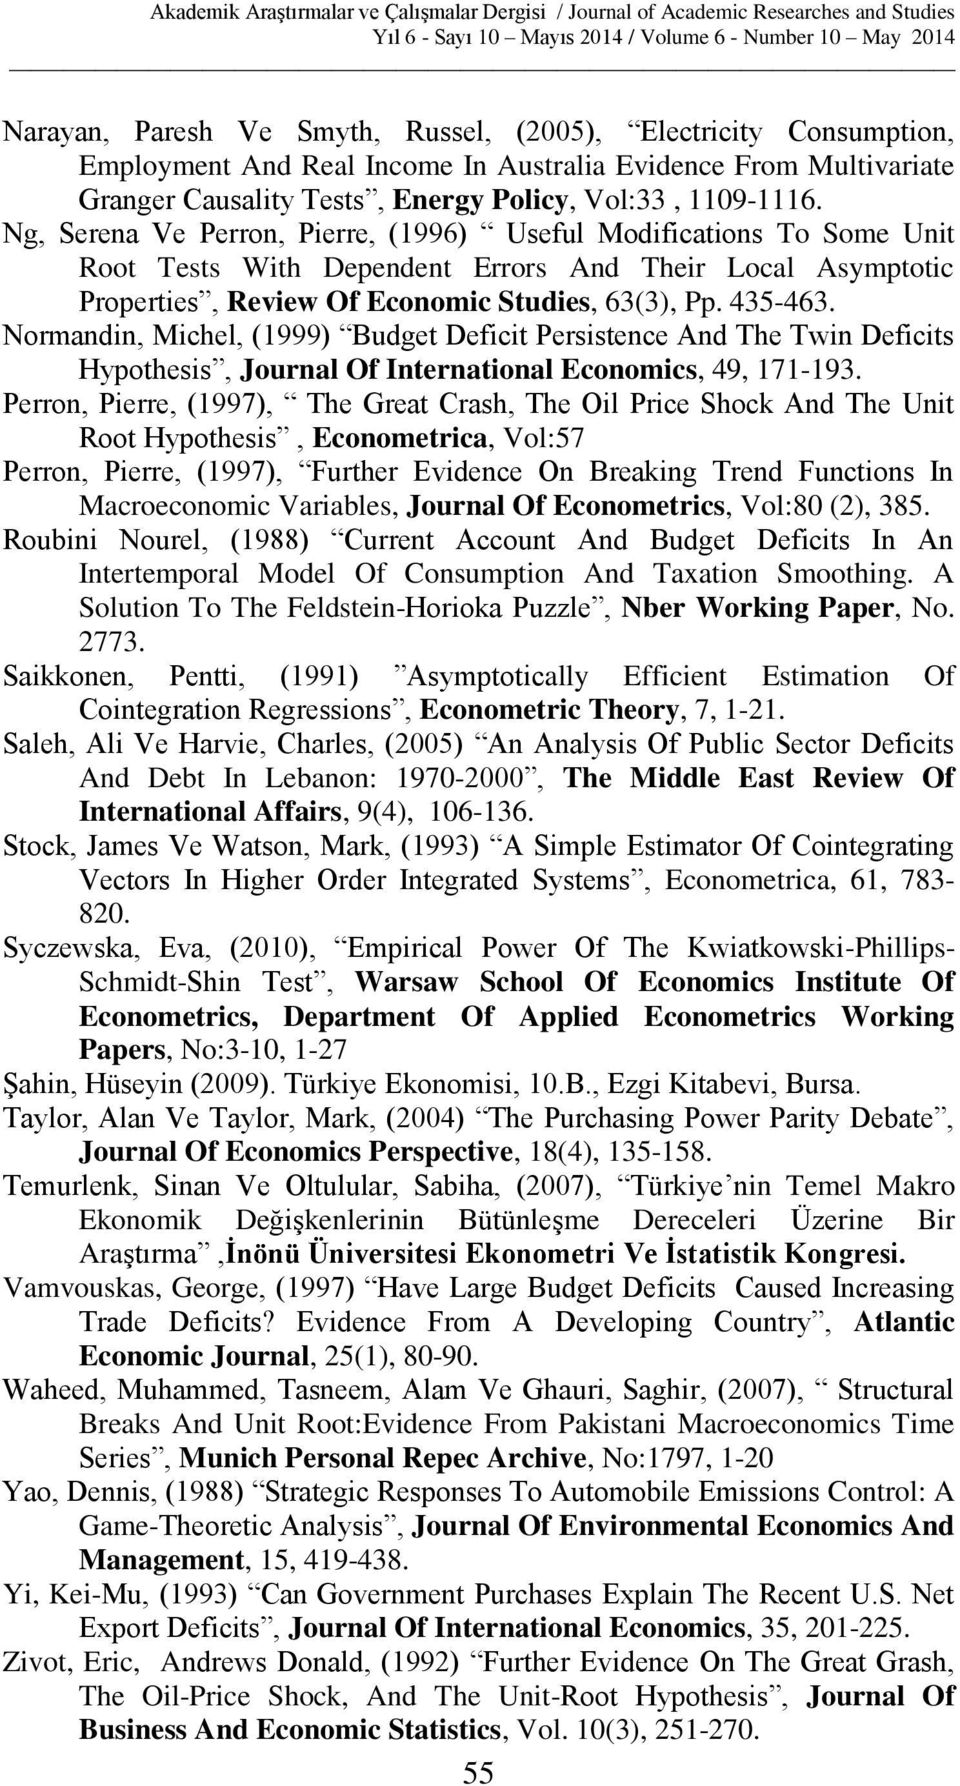 Ng, Serena Ve Perron, Pierre, (996) Useful Modificaions o Some Uni Roo ess Wih Dependen Errors And heir Local Asympoic Properies, Review Of Economic Sudies, 63(3), Pp. 435-463.